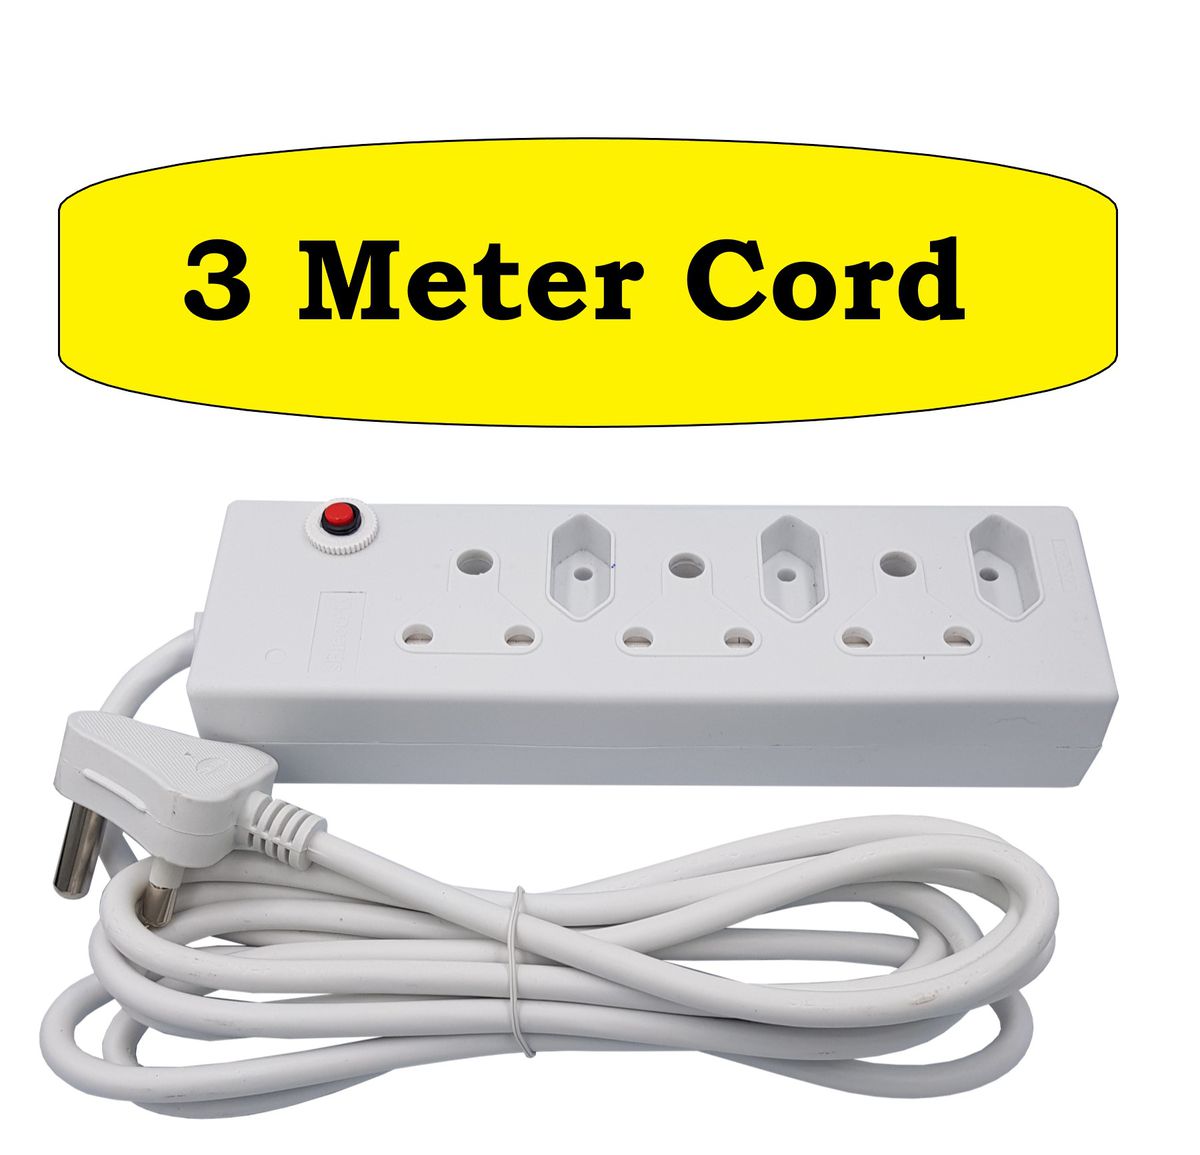 3 Meter cord Multi Plug 3x16A, 3x5A, Overload Protection